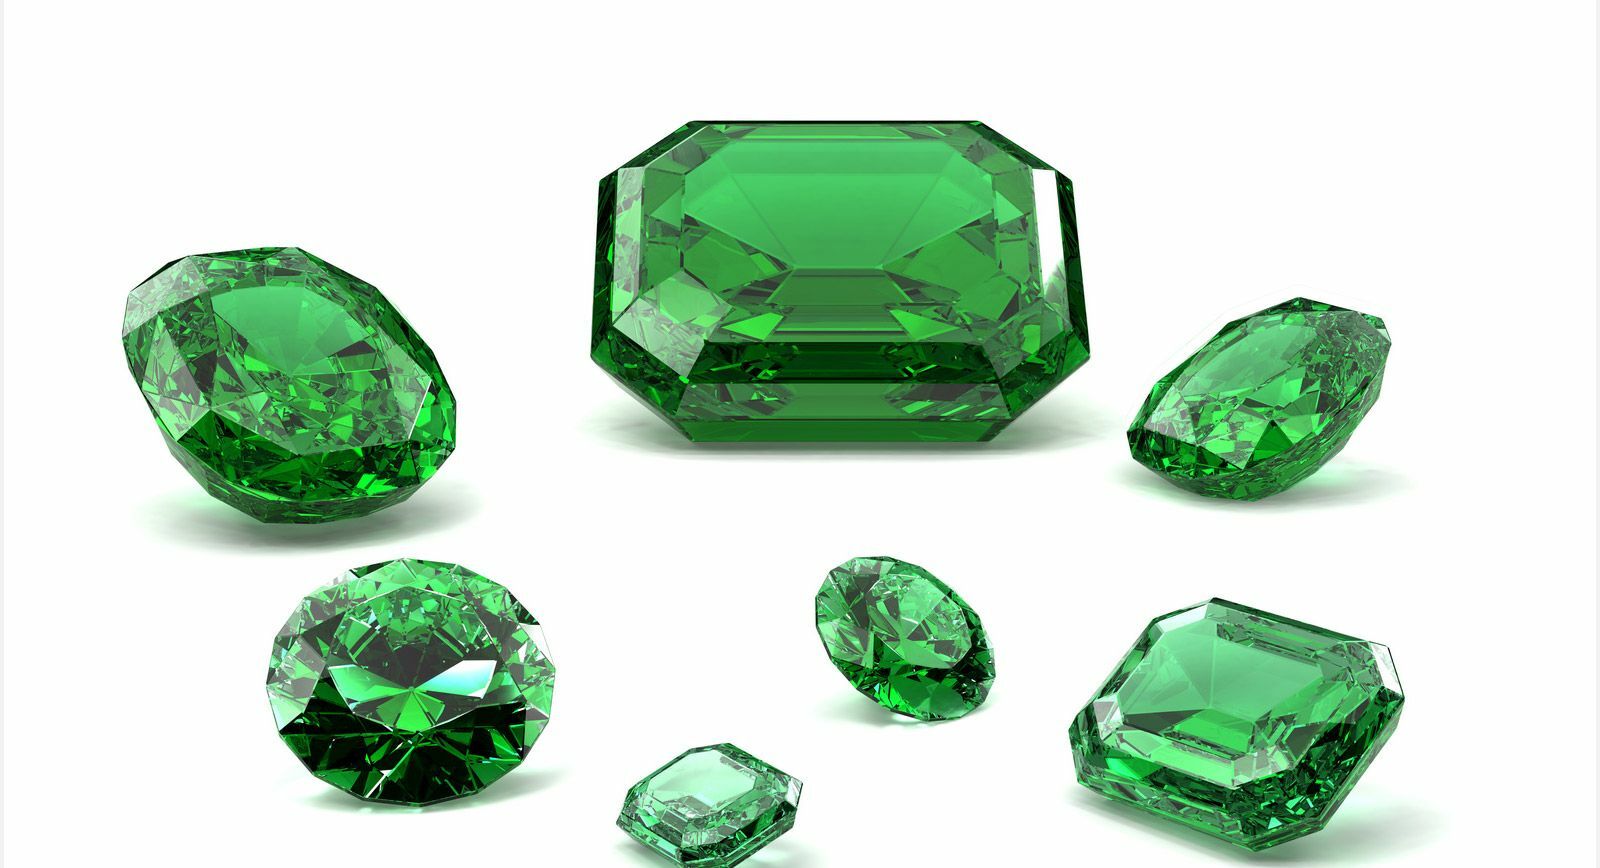 Emerald Jewellery Buying Guide: What To Look Out For